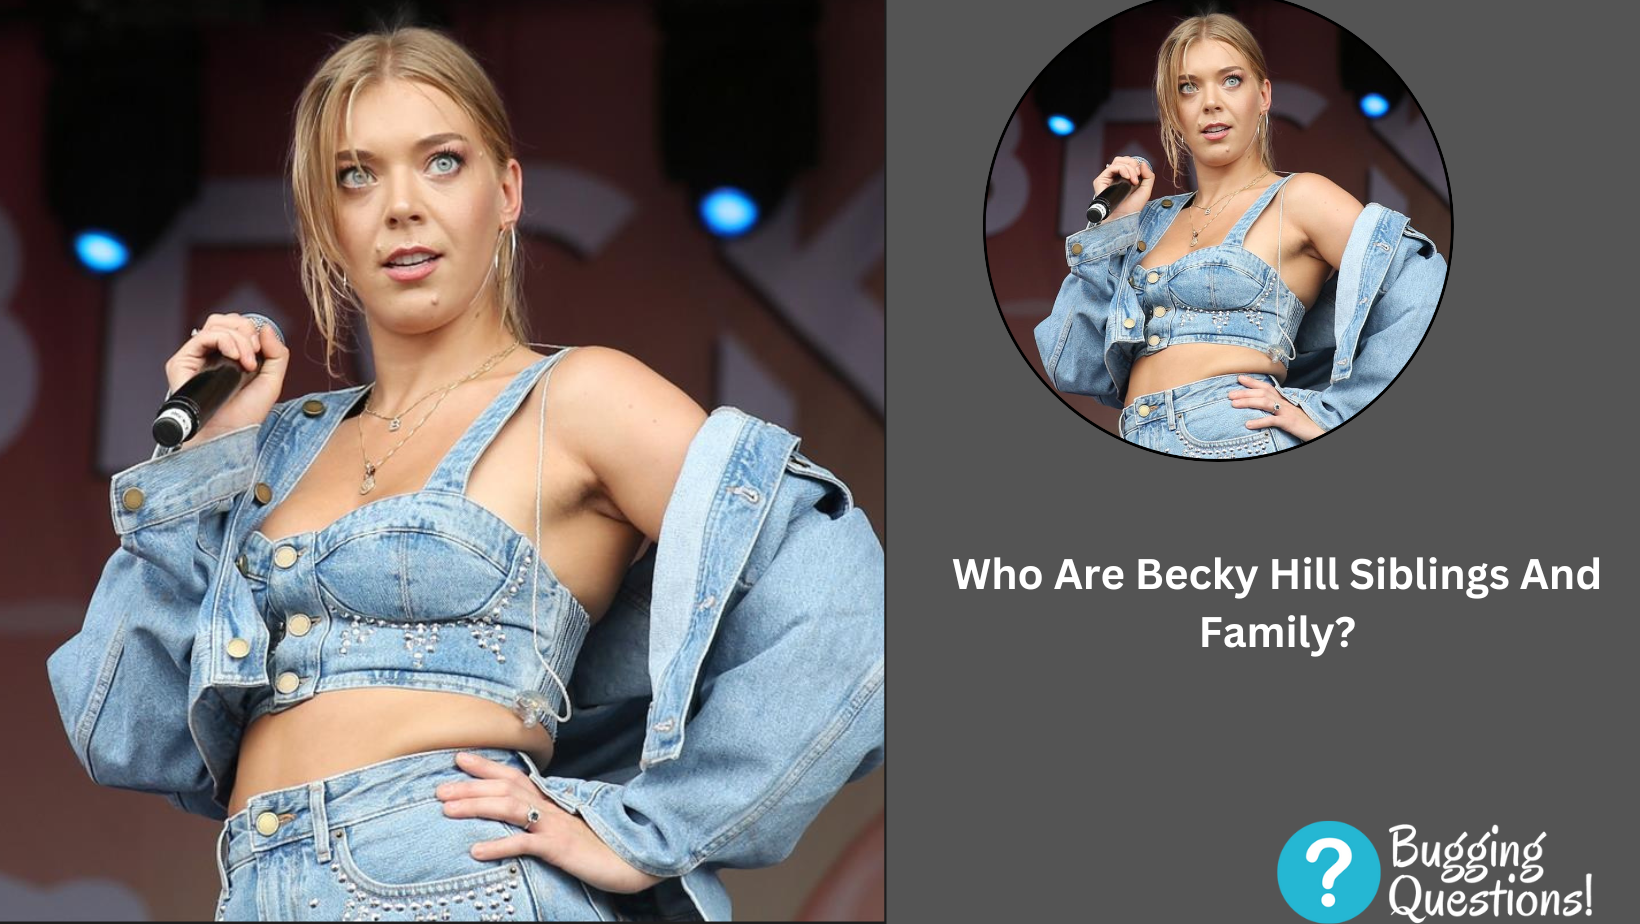 Who Are Becky Hill Siblings And Family?